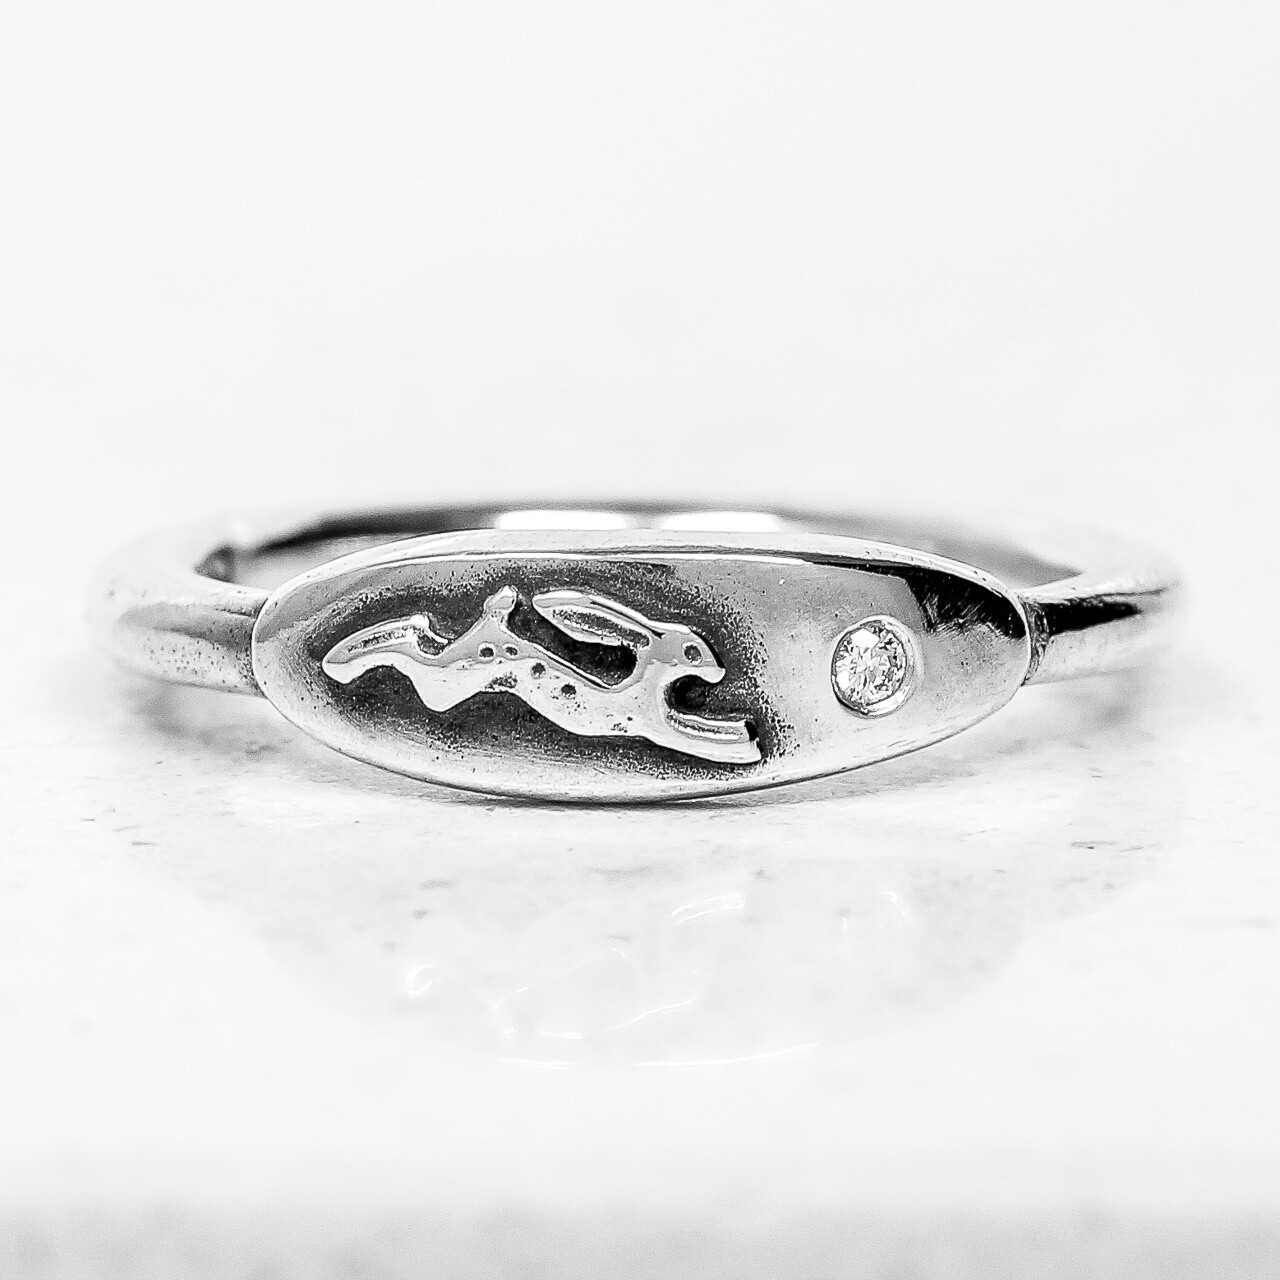 Hare and Diamond Silver Ring by Nick Hubbard